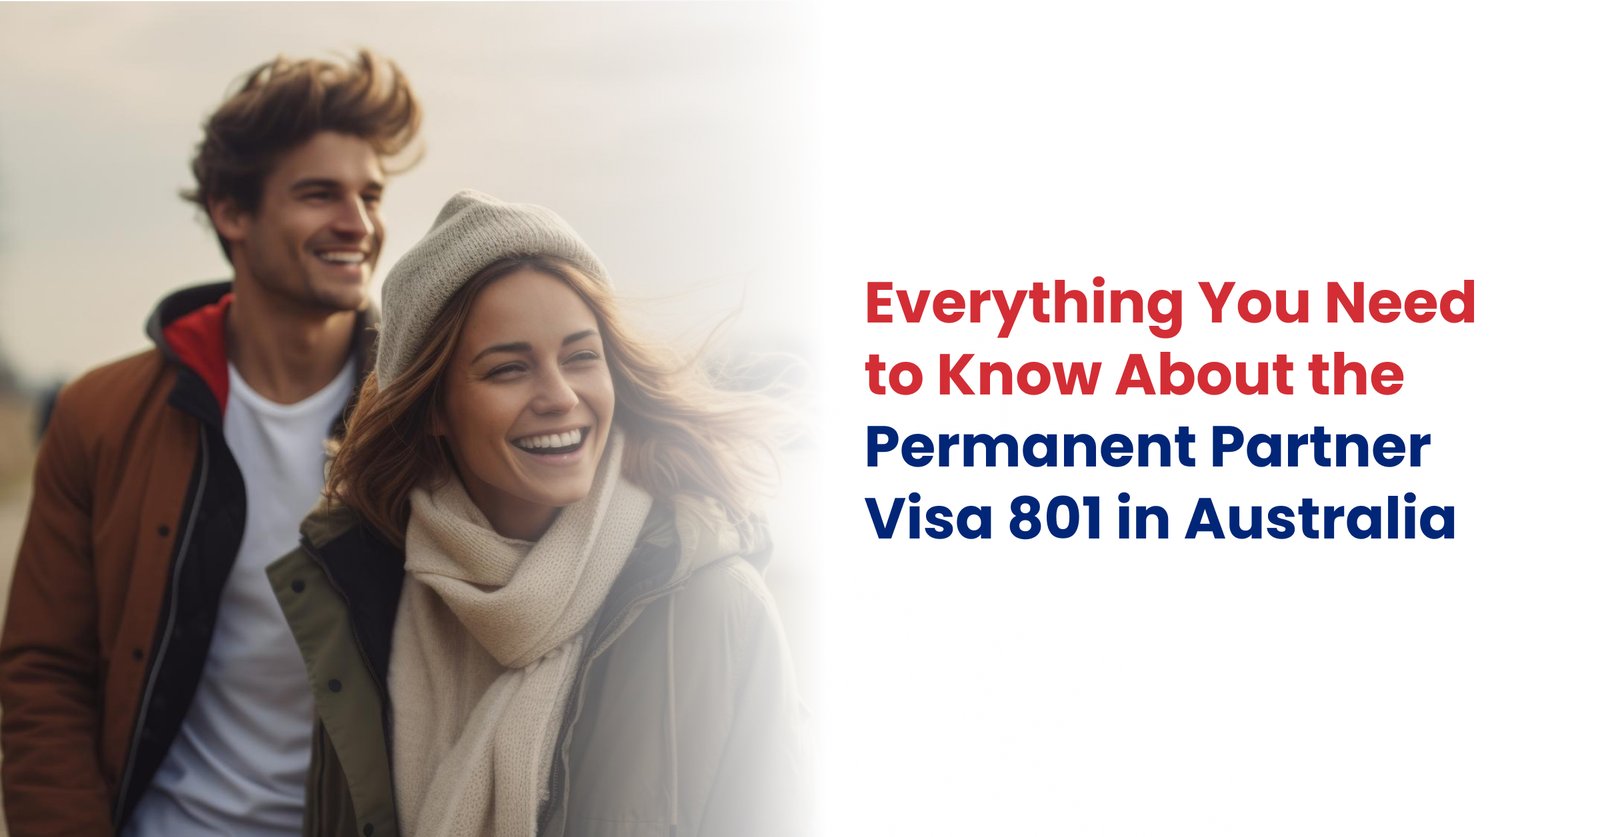 Everything You Need to Know About the Permanent Partner Visa 801 in Australia